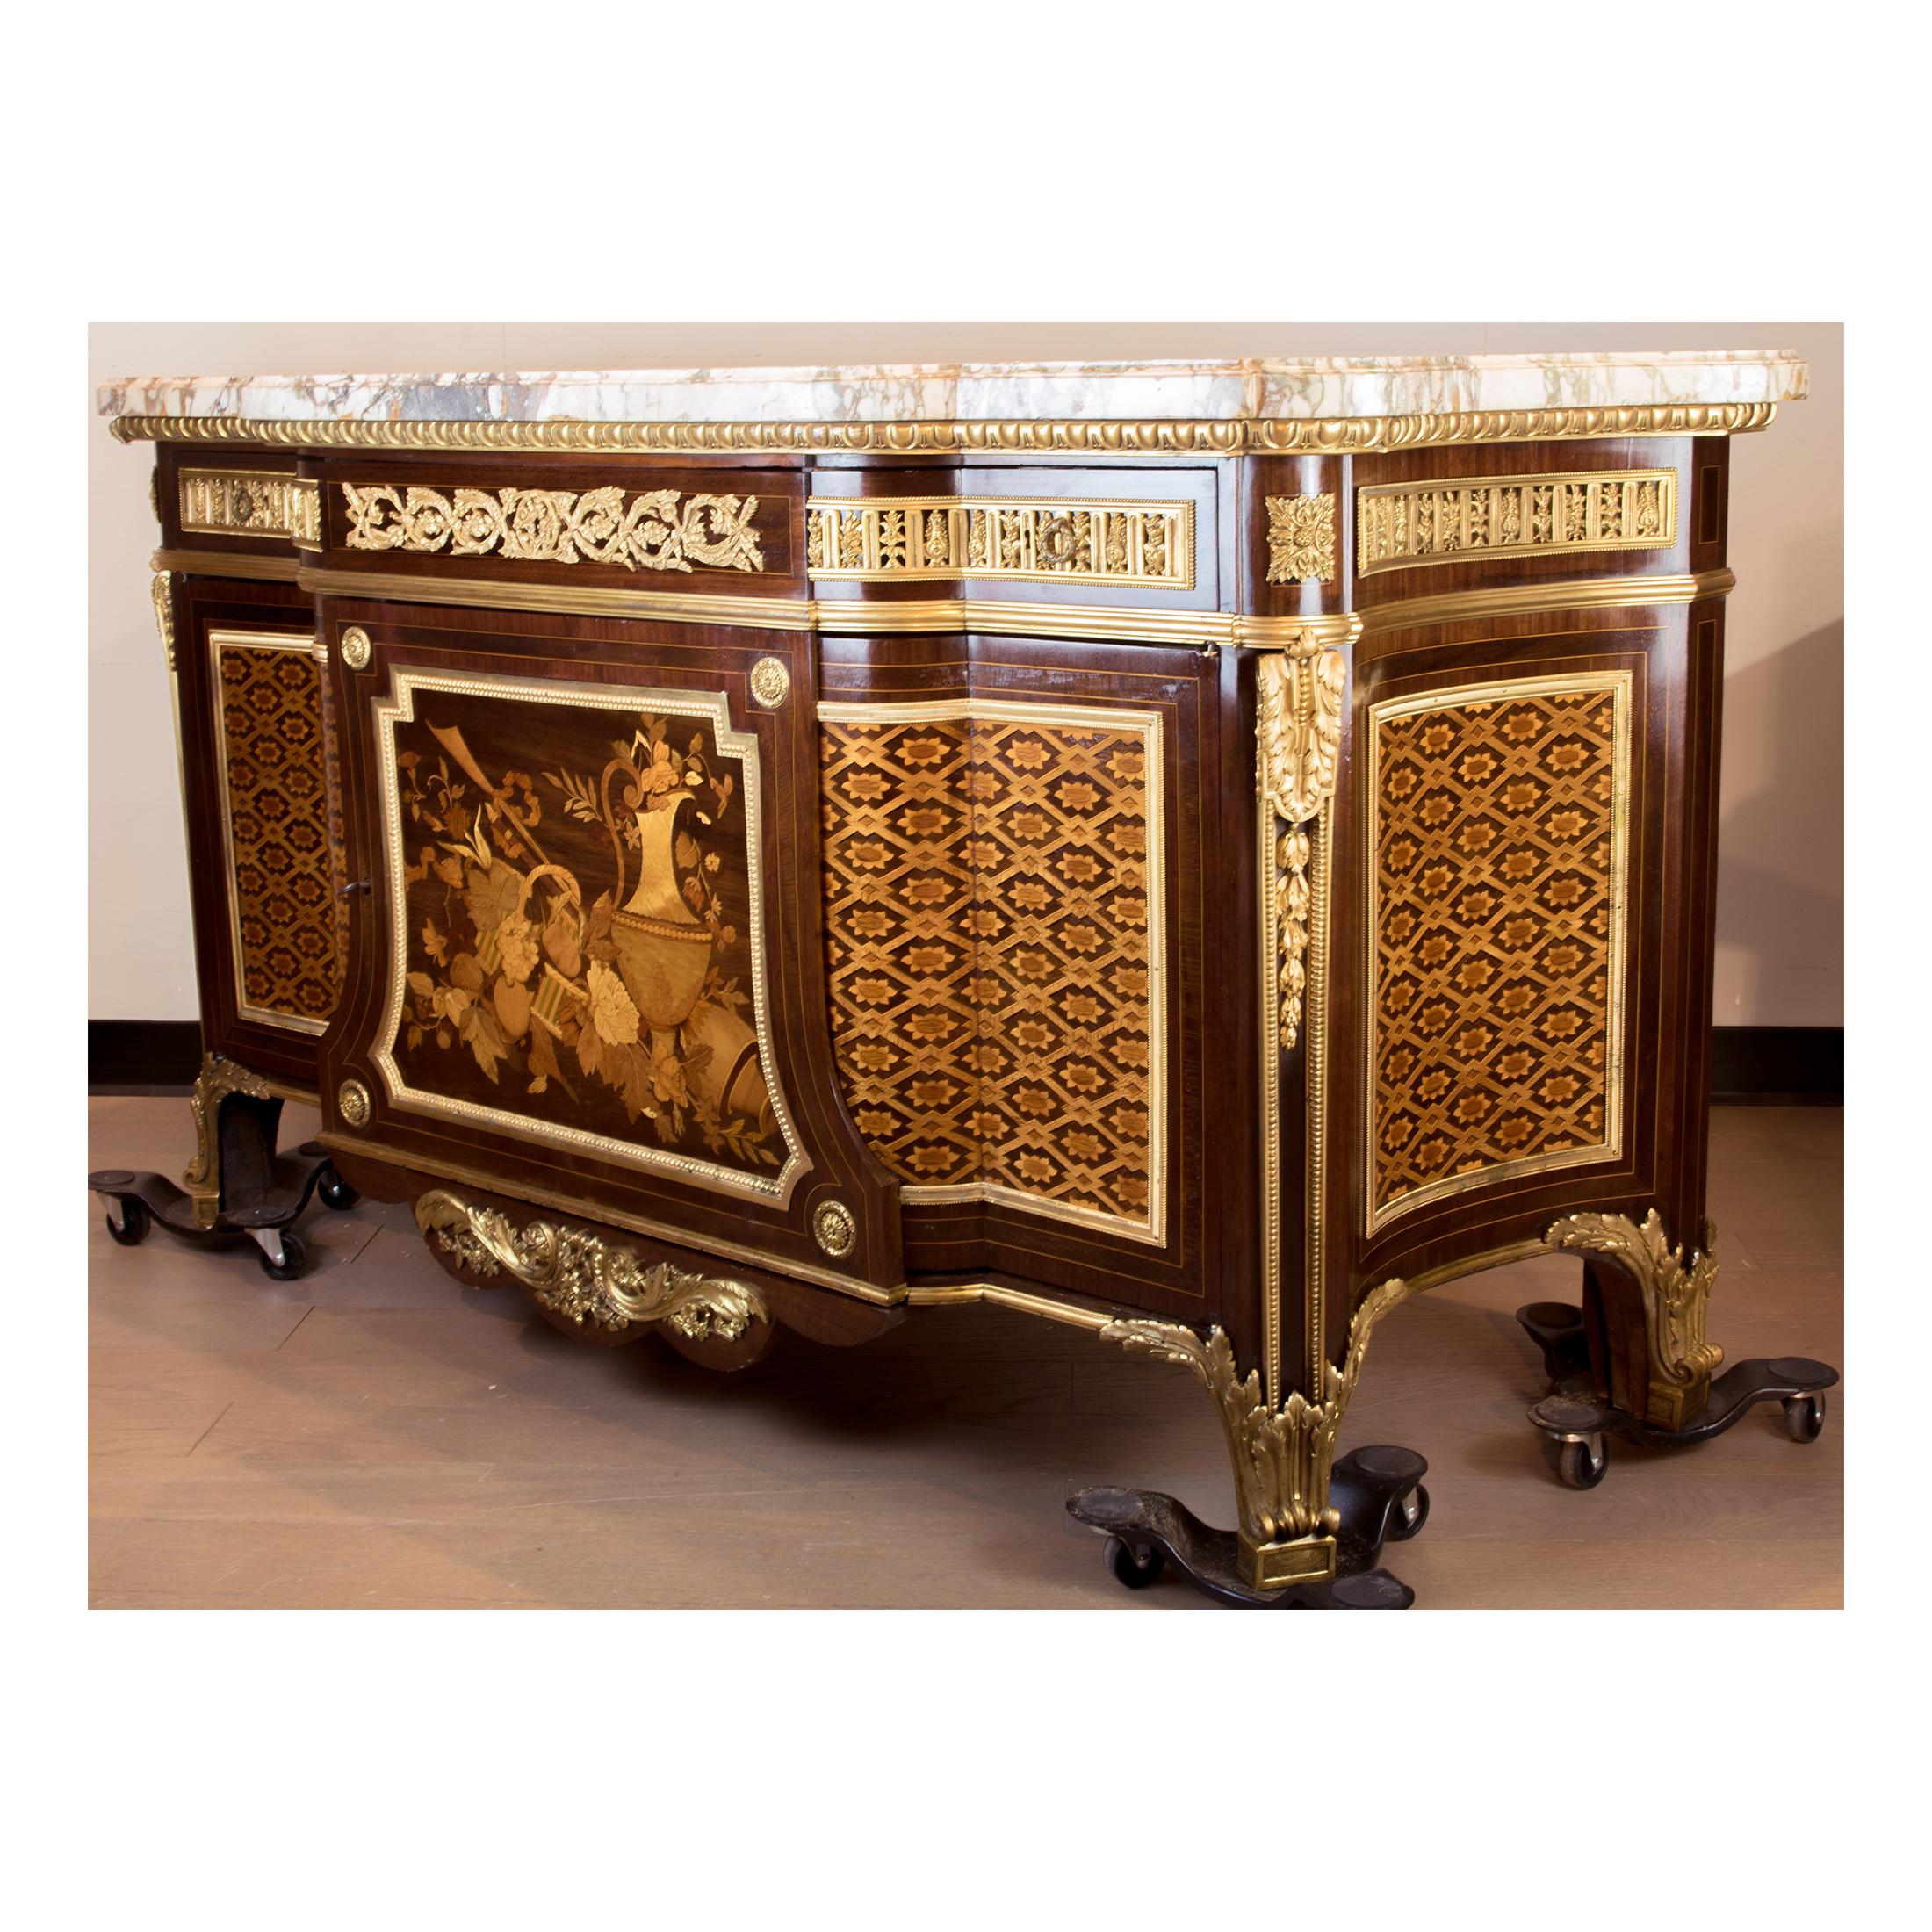 A French ormolu-mounted mahogany, amaranth, sycamore and fruitwood marquetry and parquetry commode after the model by Jean Henri Riesener.

The brècheviolette marble top above a breakfront frieze with three drawers over two cupboard doors opening